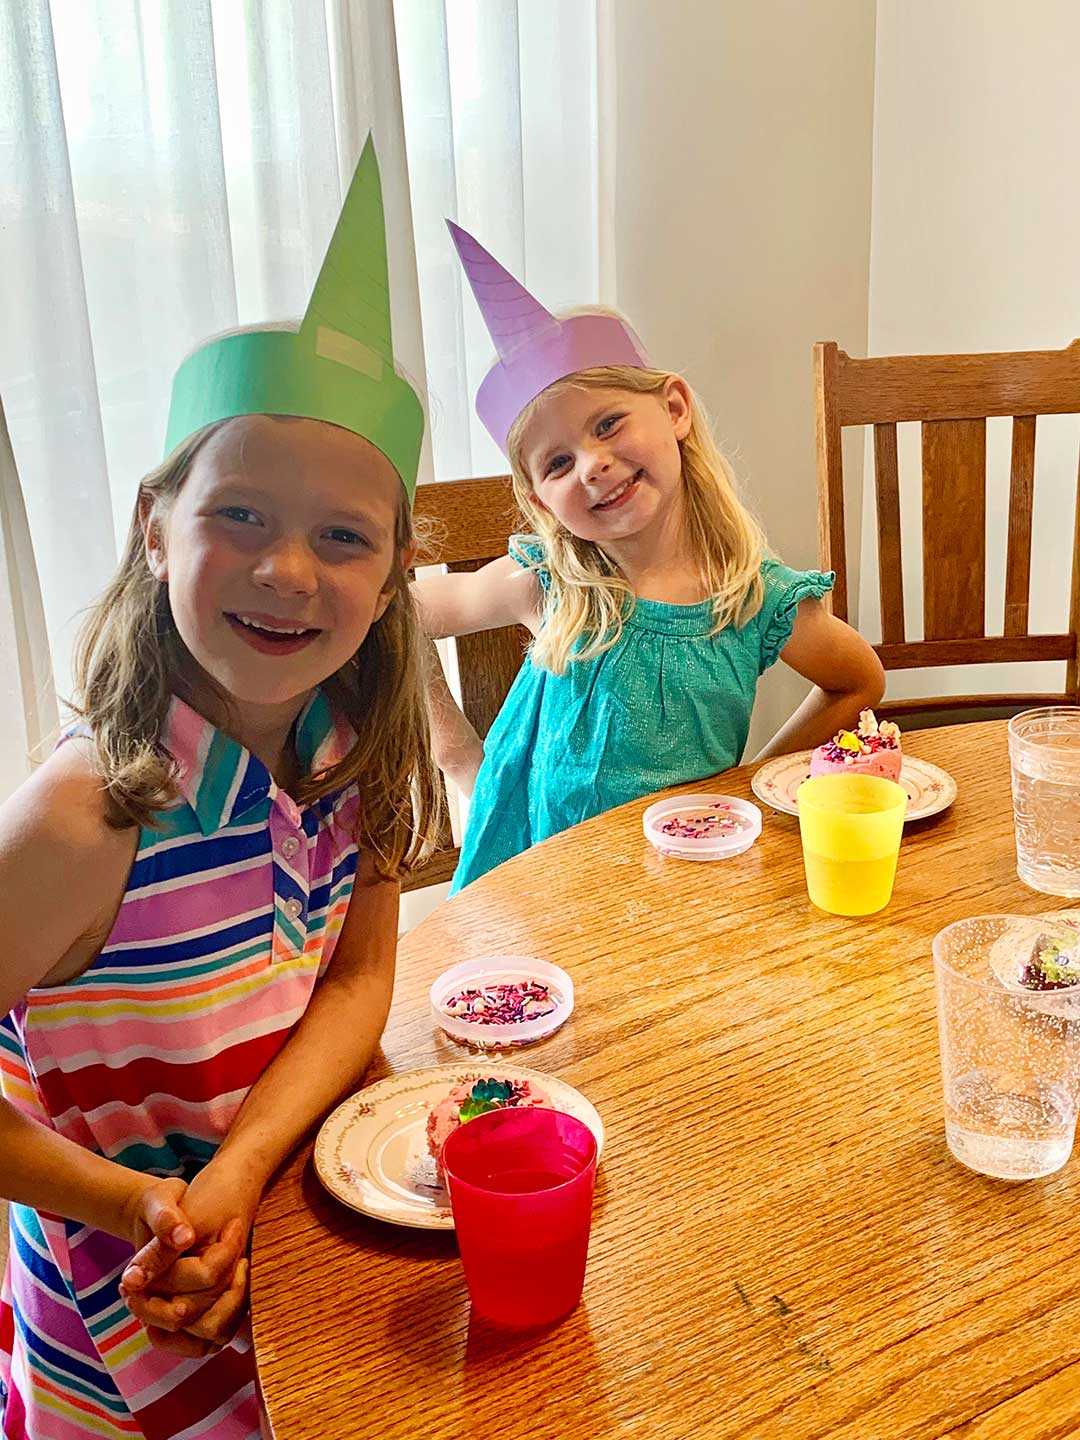 Two young girls wearing unicorn crowns made from paper sit at a kitchen table decorating cupcakes with sprinkles.